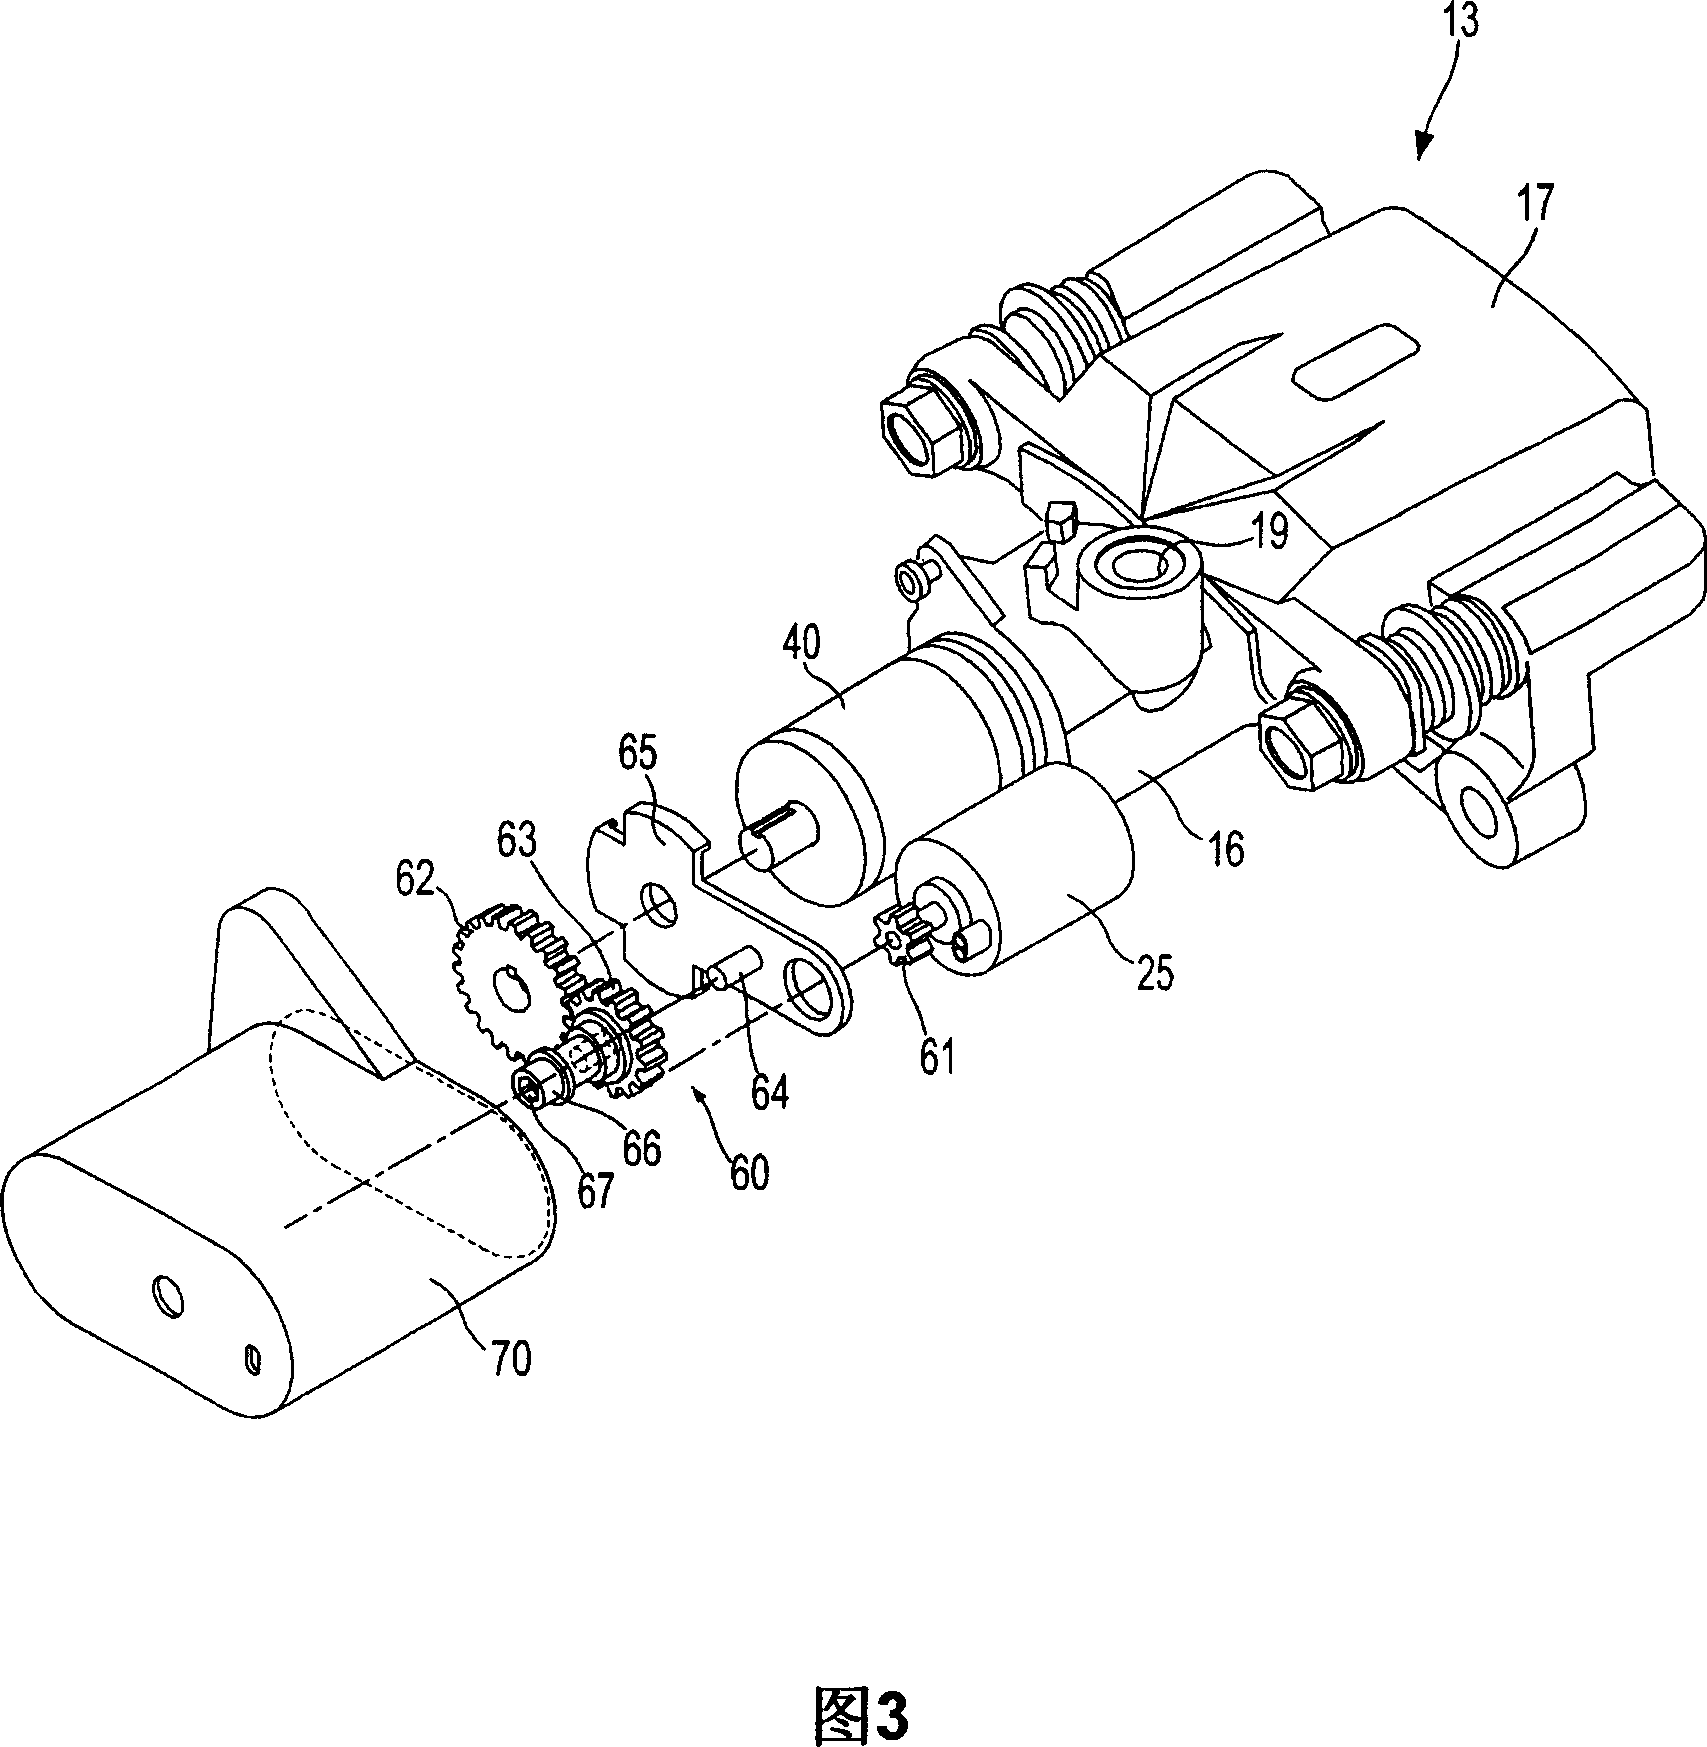 Disc brake with parking function